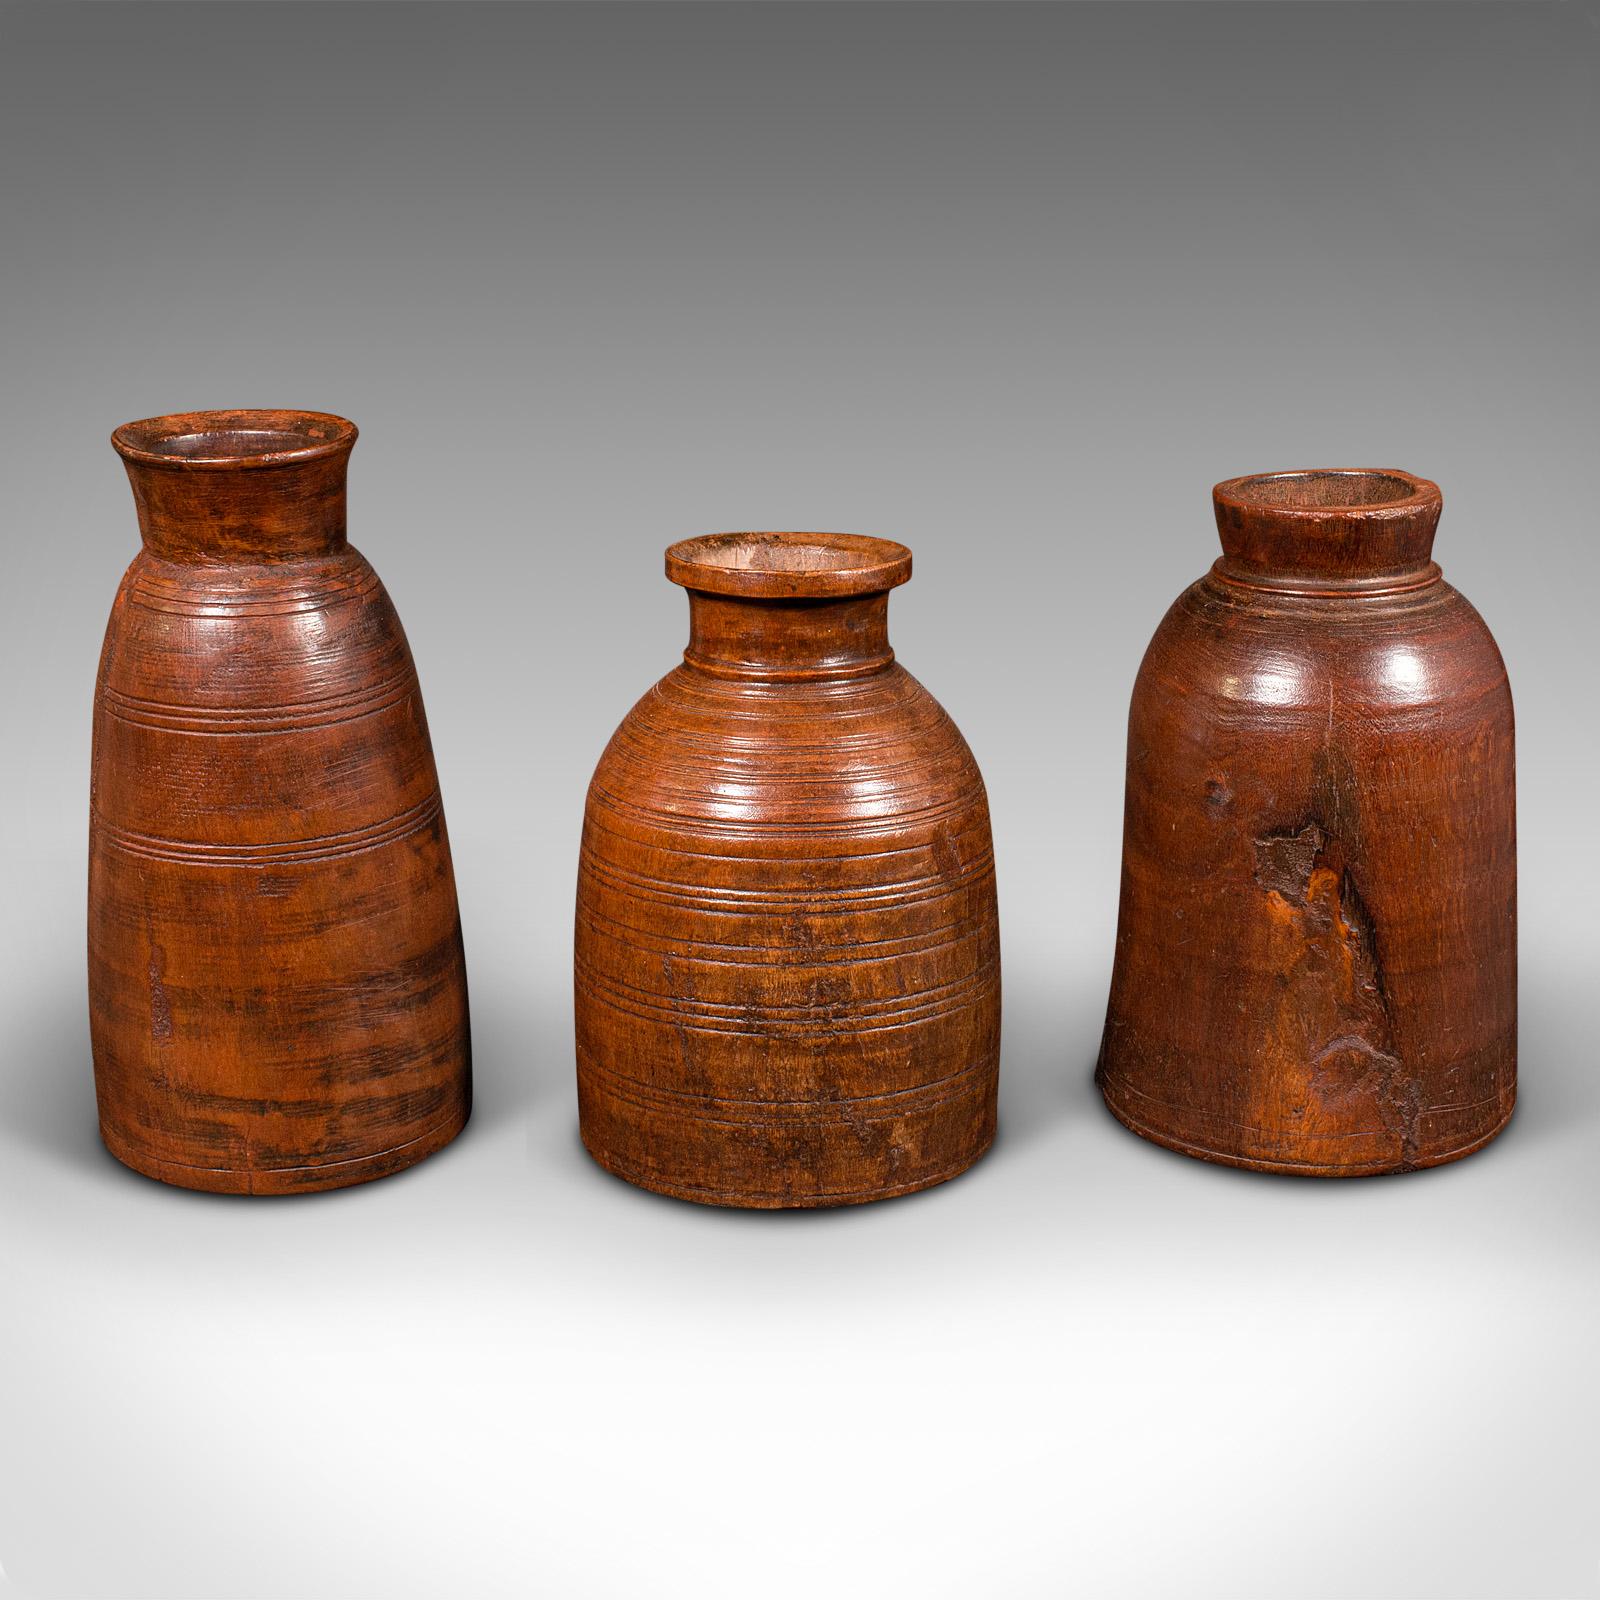 This is a trio of antique tribal vases. An Indian, hardwood accent jar or urn with rustic taste, dating to the late Victorian period, circa 1900.

Fascinating hand finished appeal to this trio of tribal accent pieces
Displaying a desirable aged